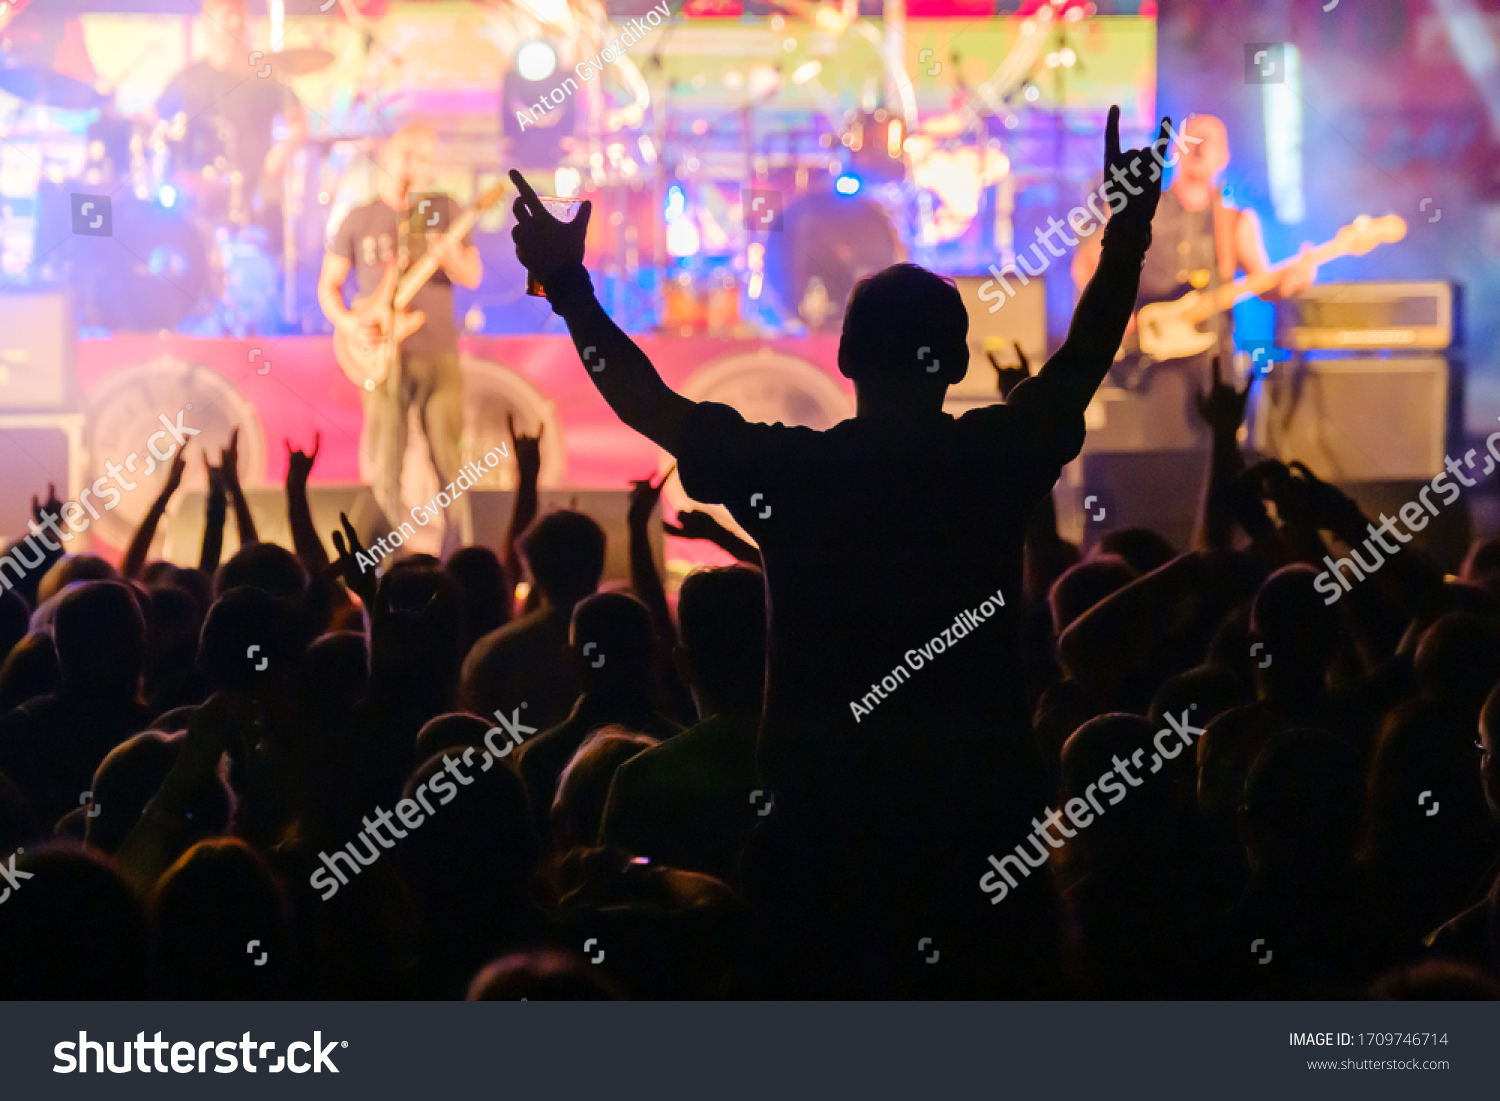 Fans at live rock music concert cheering musicians on stage, back view #1709746714